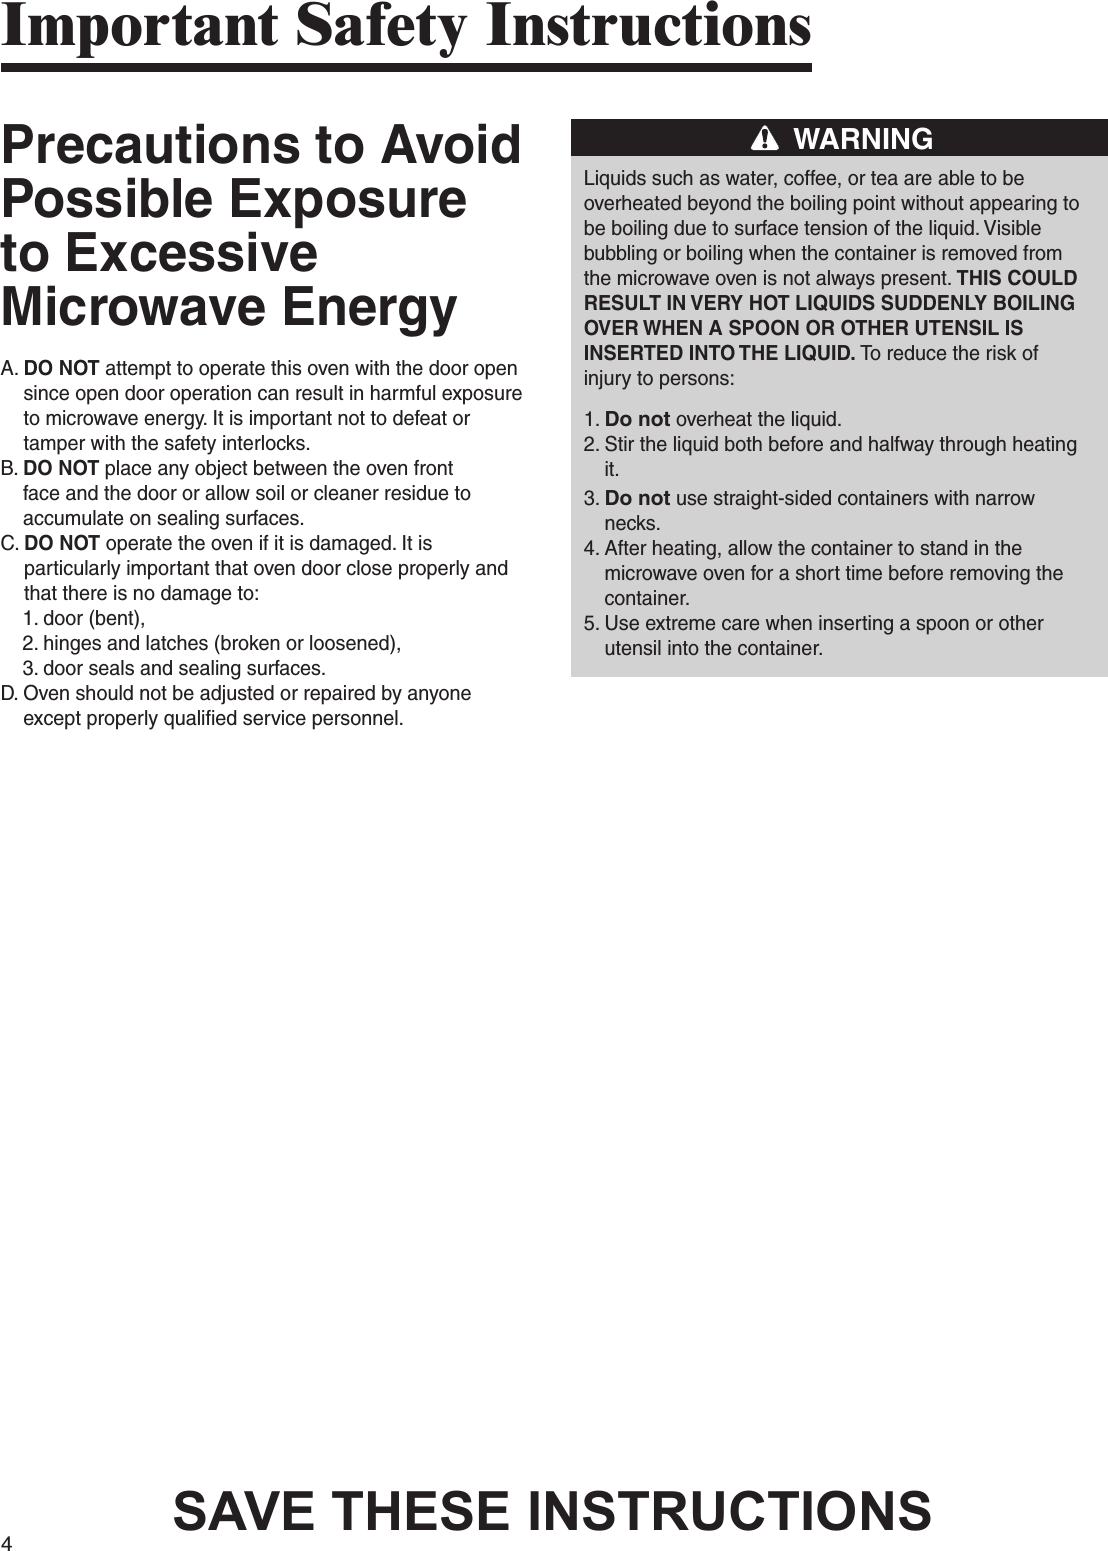 4Precautions to Avoid Possible Exposure to Excessive Microwave EnergyA.  DO NOT attempt to operate this oven with the door open since open door operation can result in harmful exposure to microwave energy. It is important not to defeat or tamper with the safety interlocks.B.  DO NOT place any object between the oven front face and the door or allow soil or cleaner residue to accumulate on sealing surfaces.C.  DO NOT operate the oven if it is damaged. It is particularly important that oven door close properly and that there is no damage to:    1. door (bent),    2. hinges and latches (broken or loosened),    3. door seals and sealing surfaces.D.  Oven should not be adjusted or repaired by anyone except properly qualified service personnel.WARNINGLiquids such as water, coffee, or tea are able to beoverheated beyond the boiling point without appearing tobe boiling due to surface tension of the liquid. Visiblebubbling or boiling when the container is removed fromthe microwave oven is not always present. THIS COULDRESULT IN VERY HOT LIQUIDS SUDDENLY BOILINGOVER WHEN A SPOON OR OTHER UTENSIL ISINSERTED INTO THE LIQUID. To reduce the risk ofinjury to persons:1. Do not overheat the liquid.2.  Stir the liquid both before and halfway through heating it.3.  Do not use straight-sided containers with narrow necks.4.  After heating, allow the container to stand in the microwave oven for a short time before removing the container.5.  Use extreme care when inserting a spoon or other utensil into the container.Important Safety InstructionsSAVE THESE INSTRUCTIONS